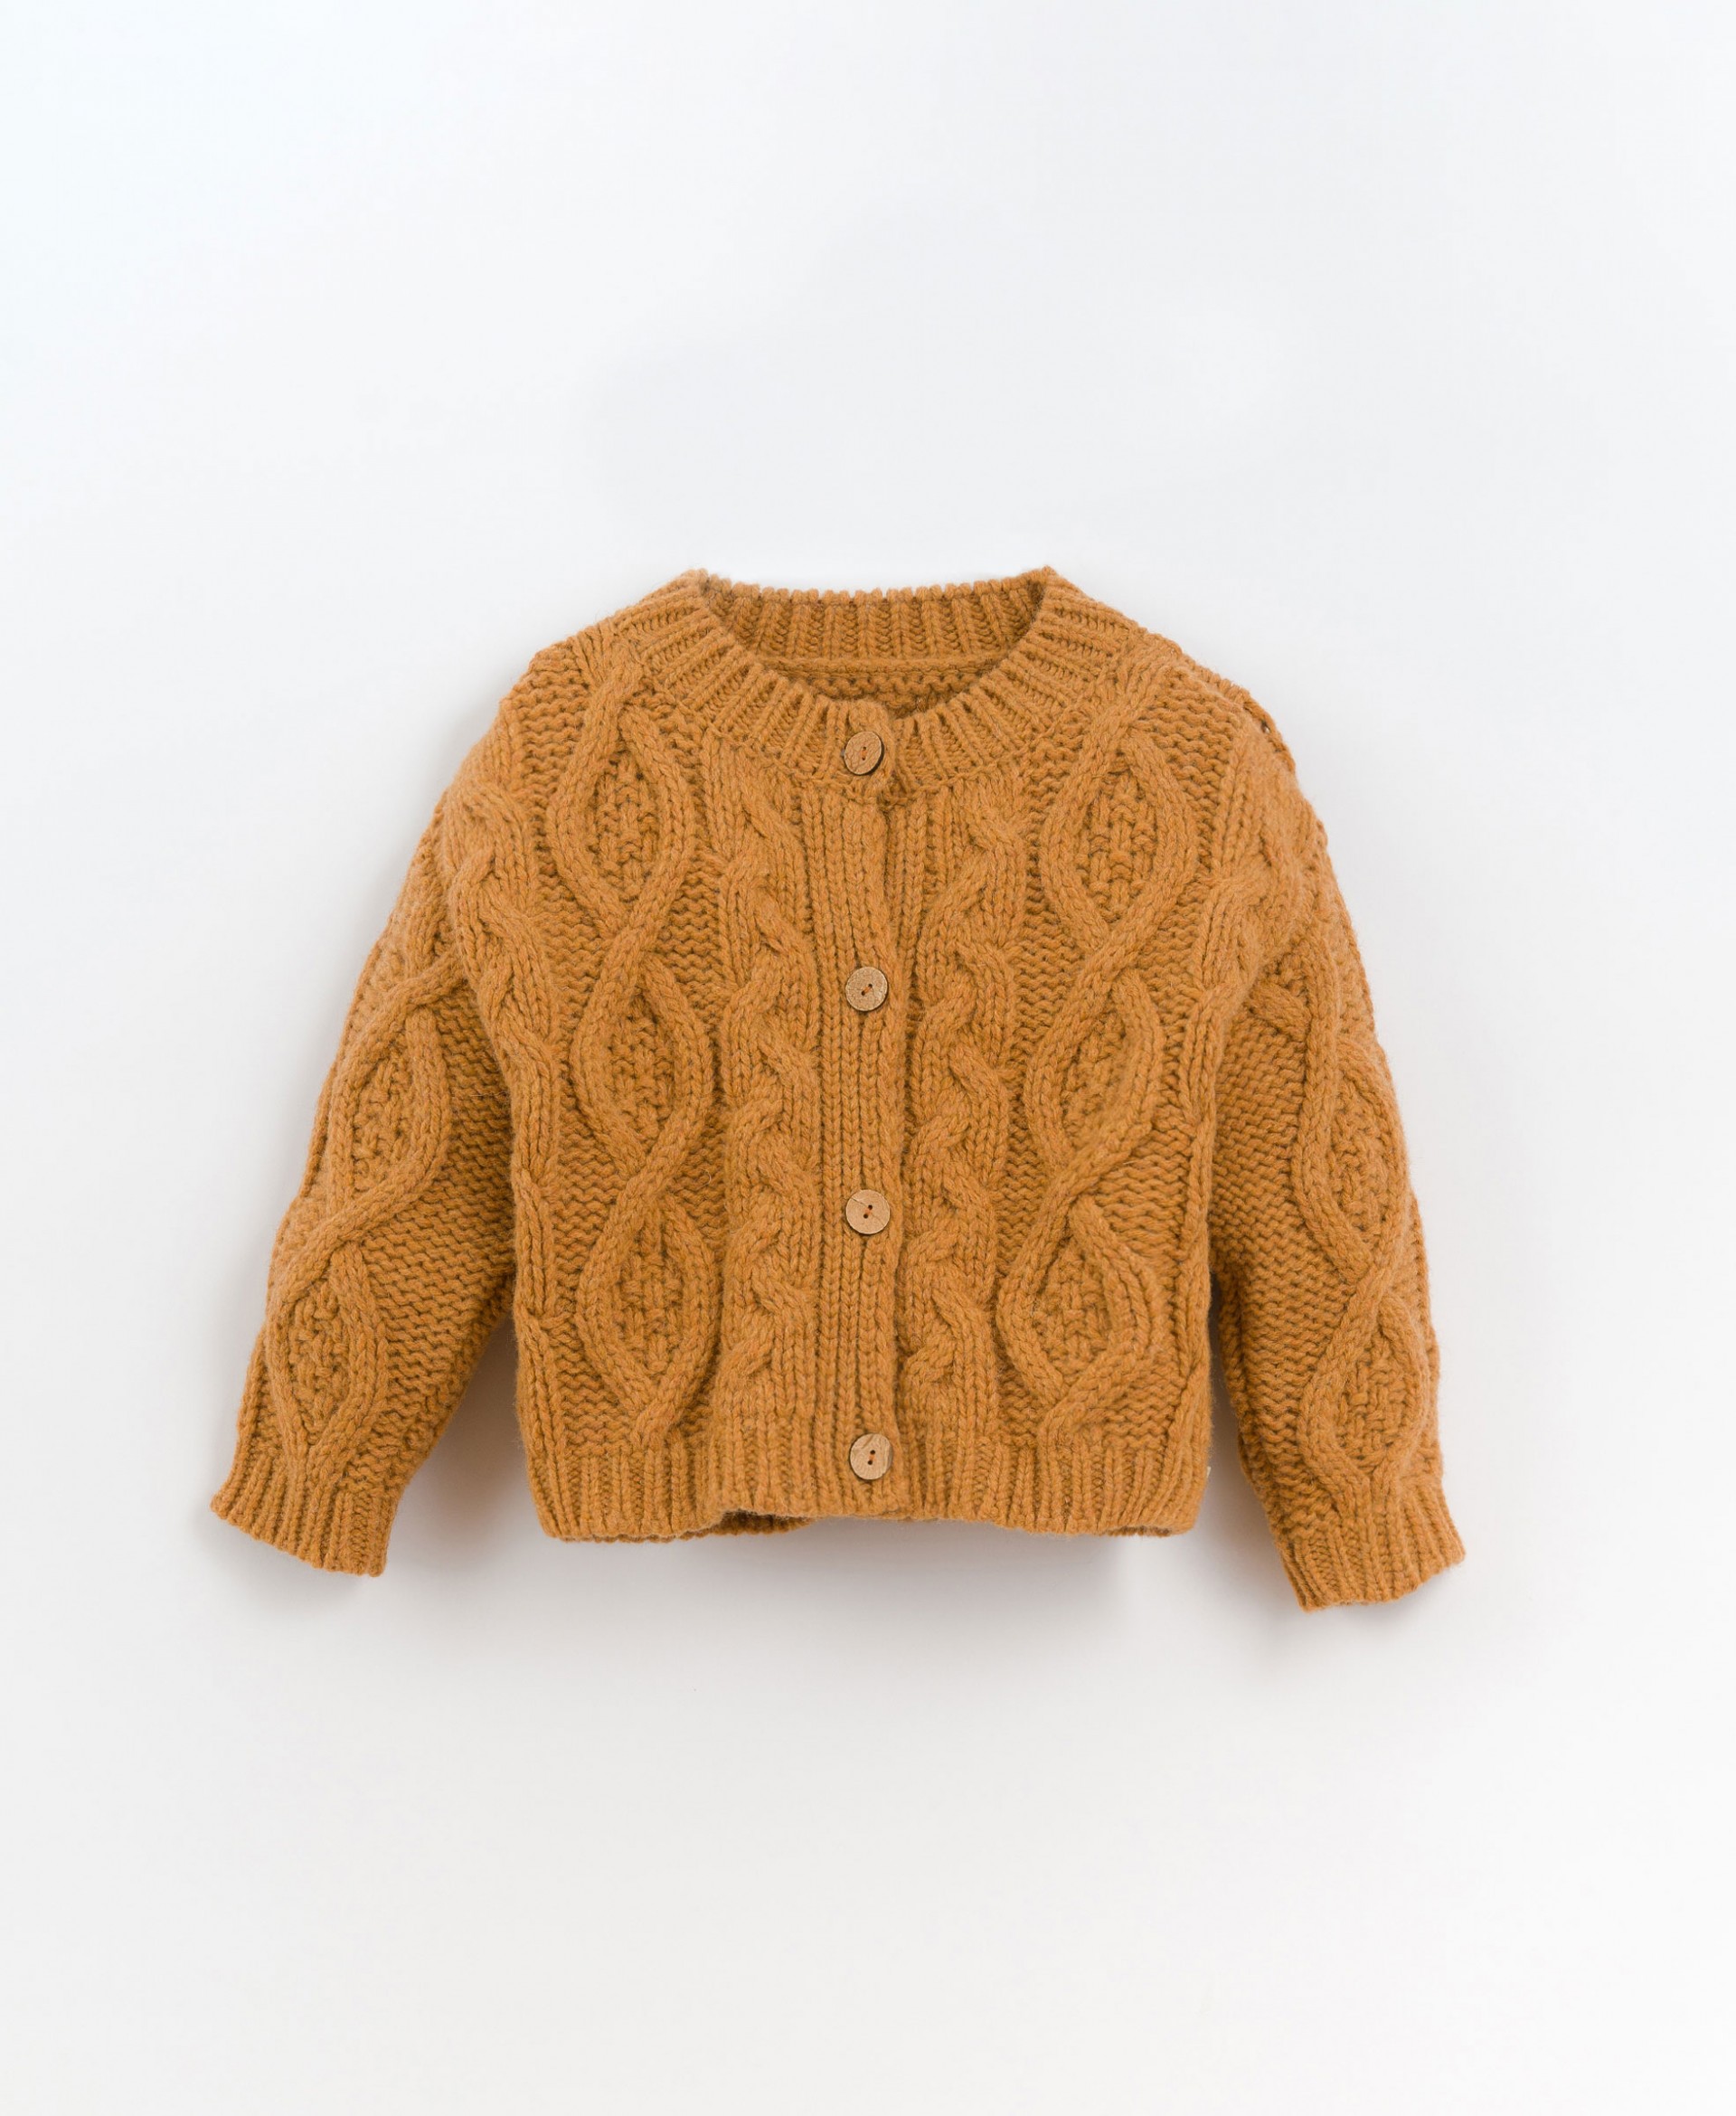 Jersey stitch jacket with recycled fibres | Culinary